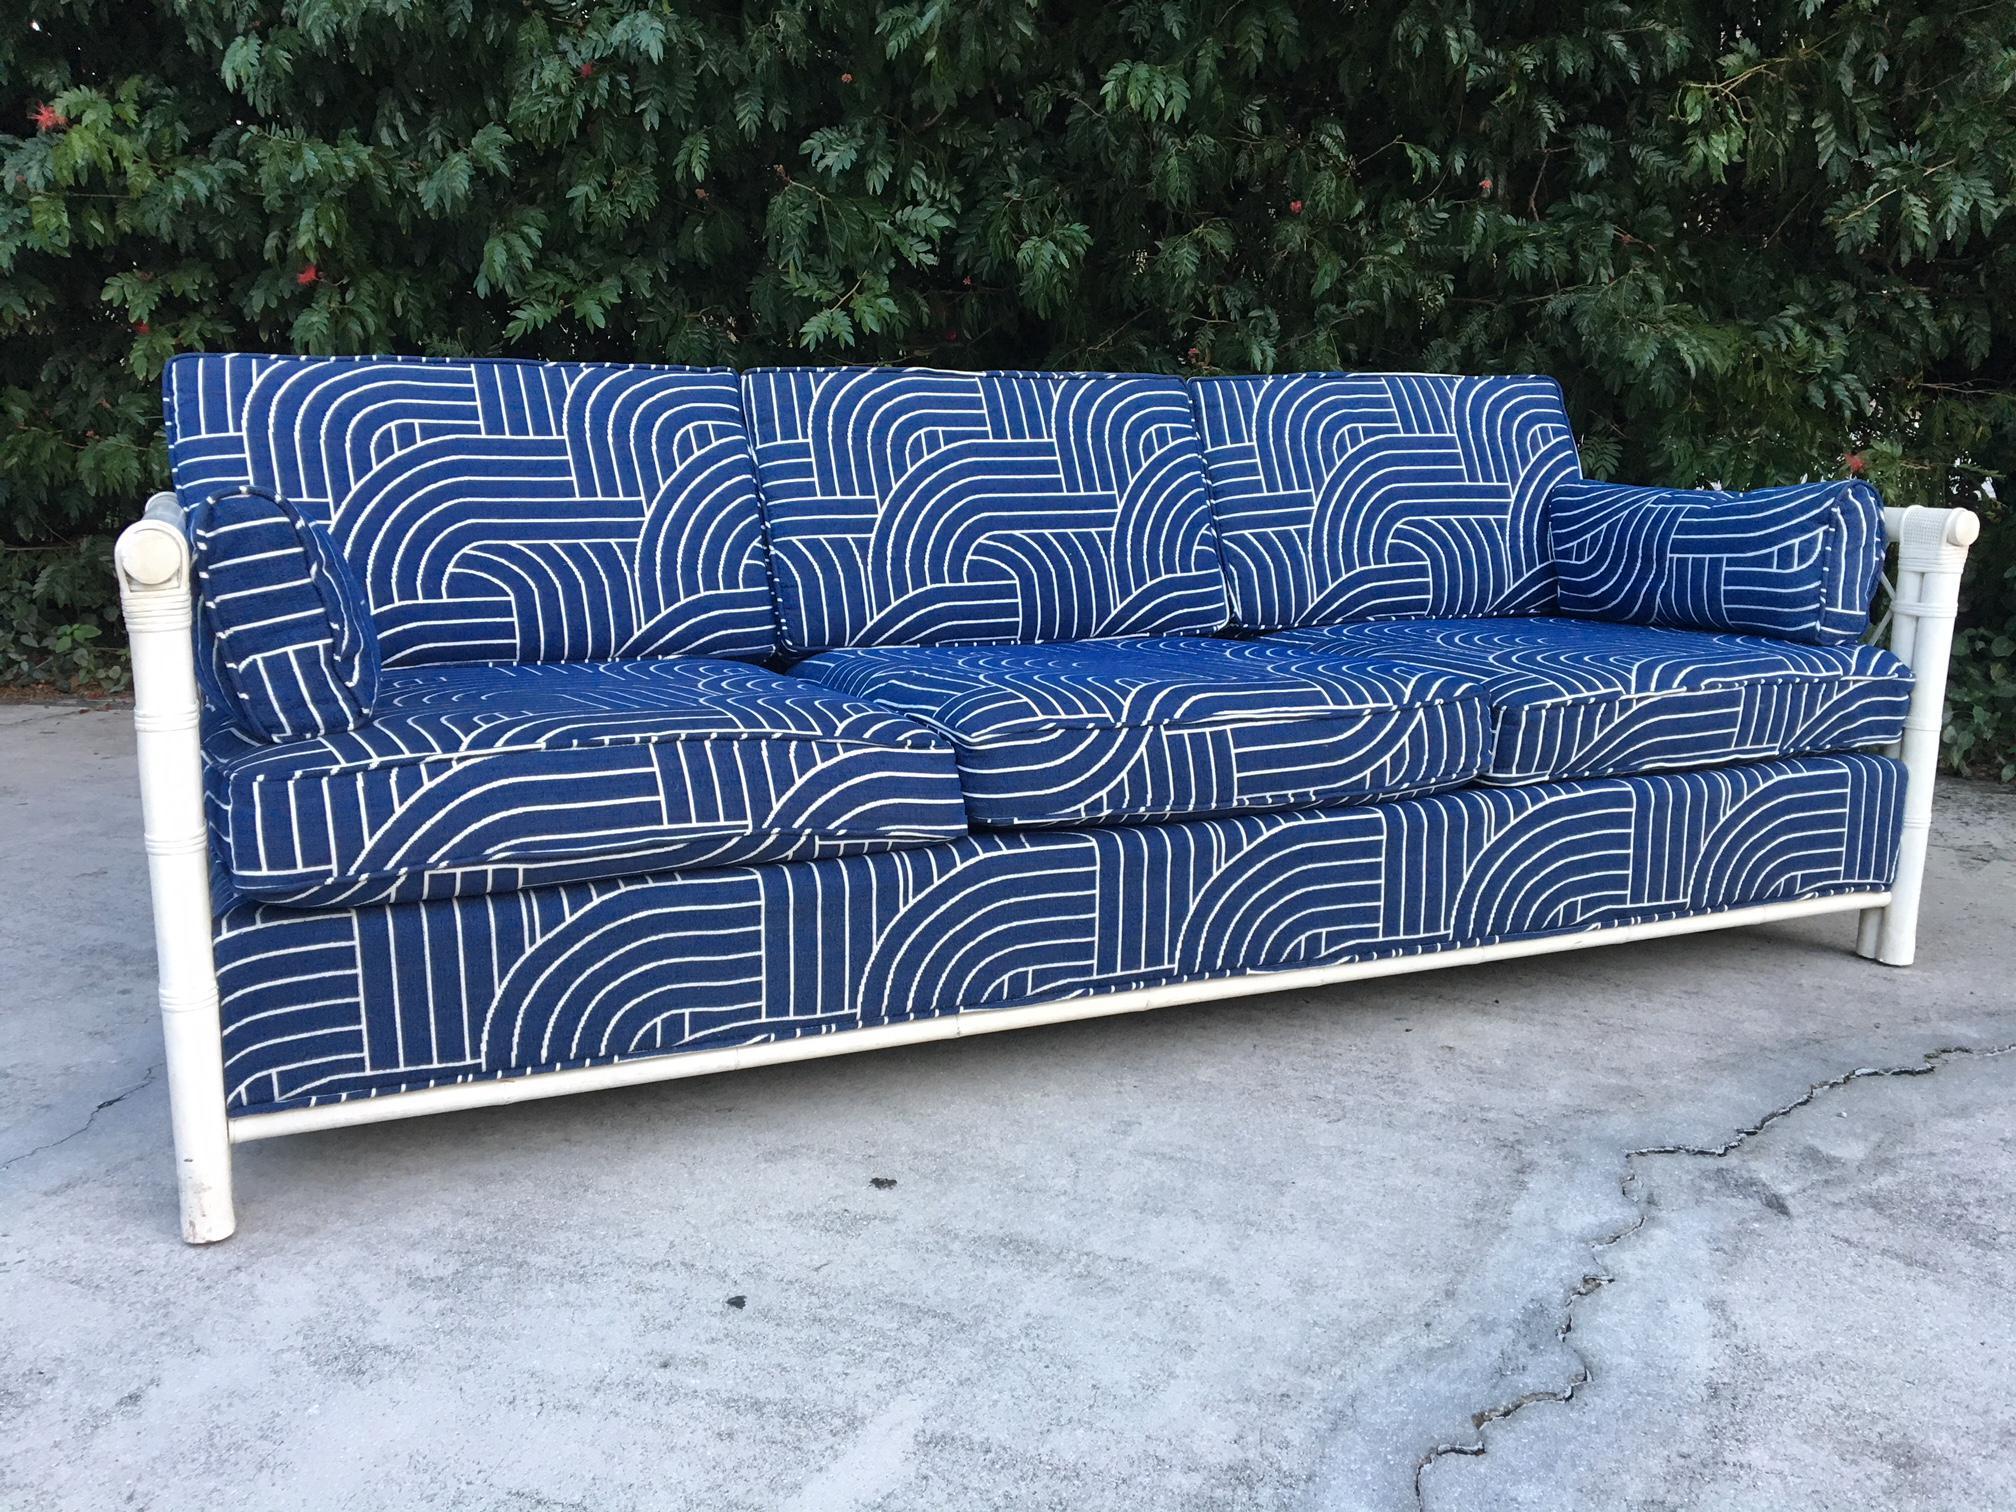 Beautiful rattan sofa features deep blue fabric with a modern print and woven rattan sides. Good vintage condition with no stains or tears to fabric. Minor wear to frame consistent with age.
 